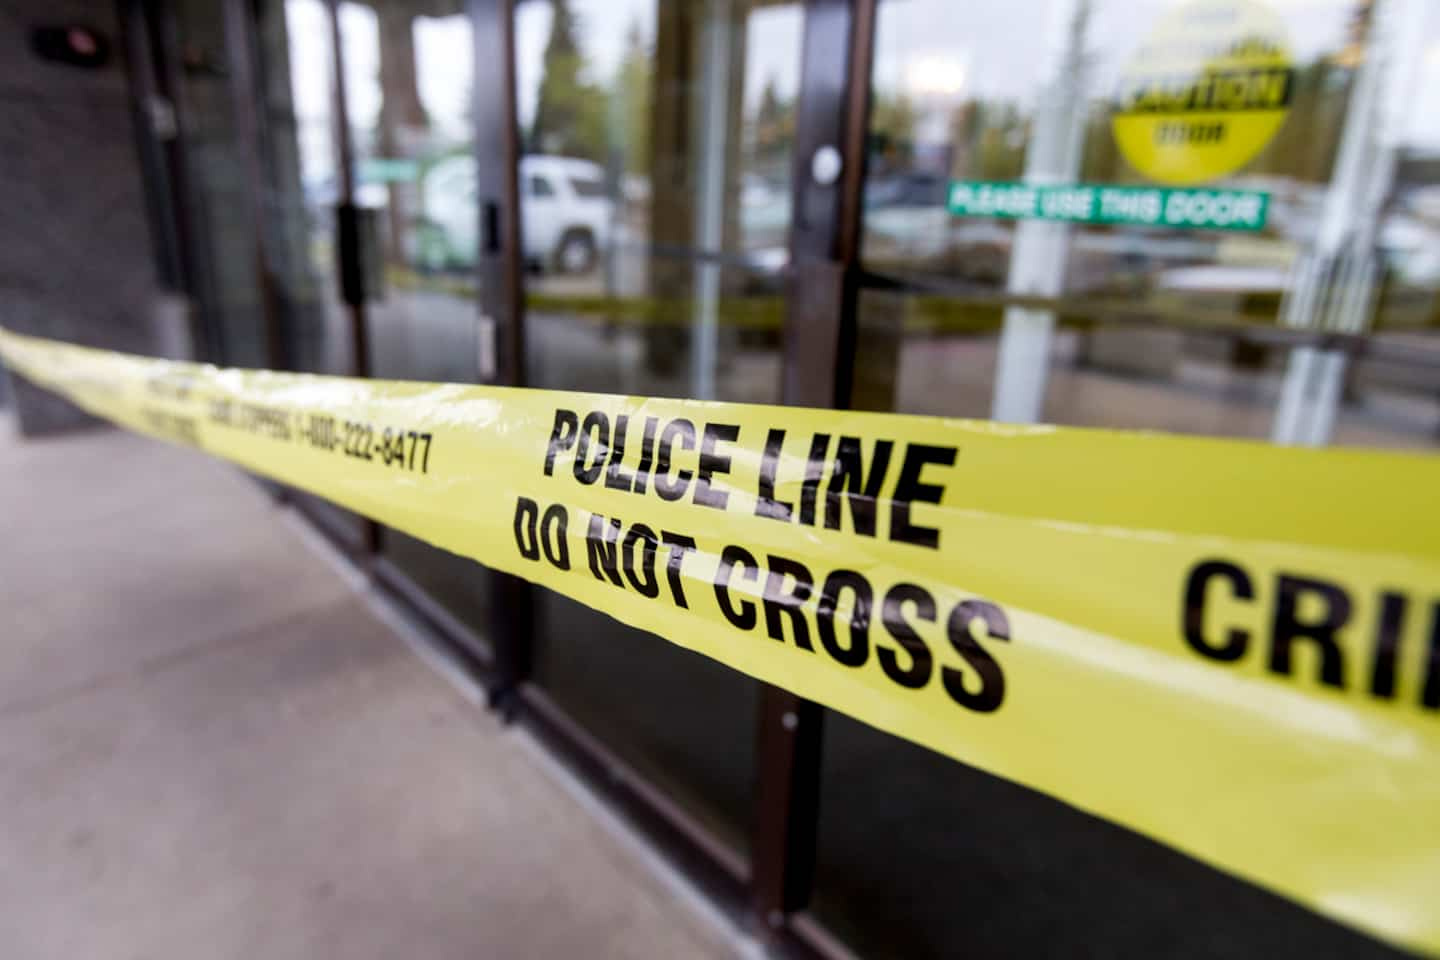 Calgary: a man attacks 5 people, including a police officer